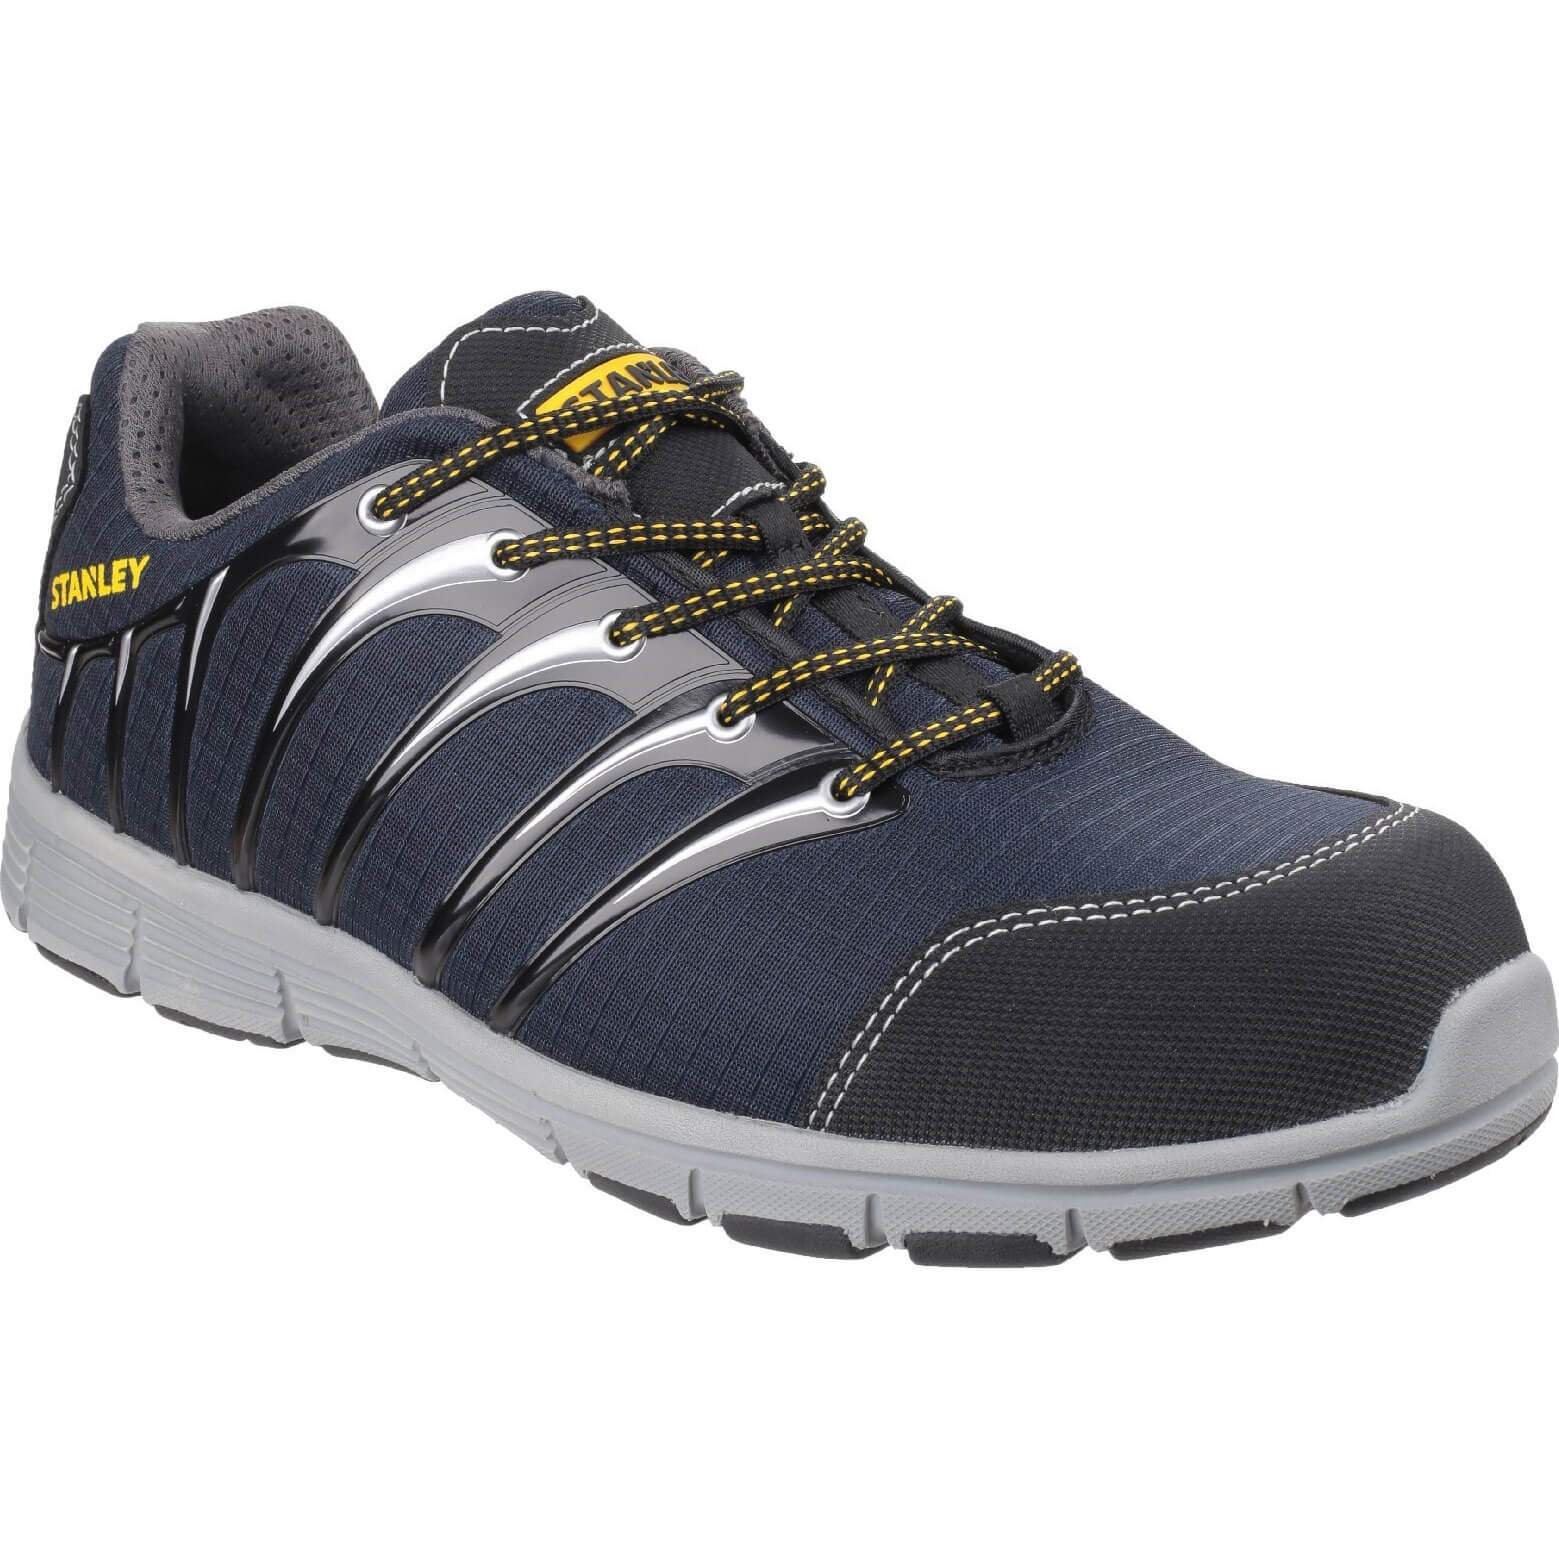 Image of Stanley Globe S1 P Sports Safety Trainer Navy / Grey Size 8